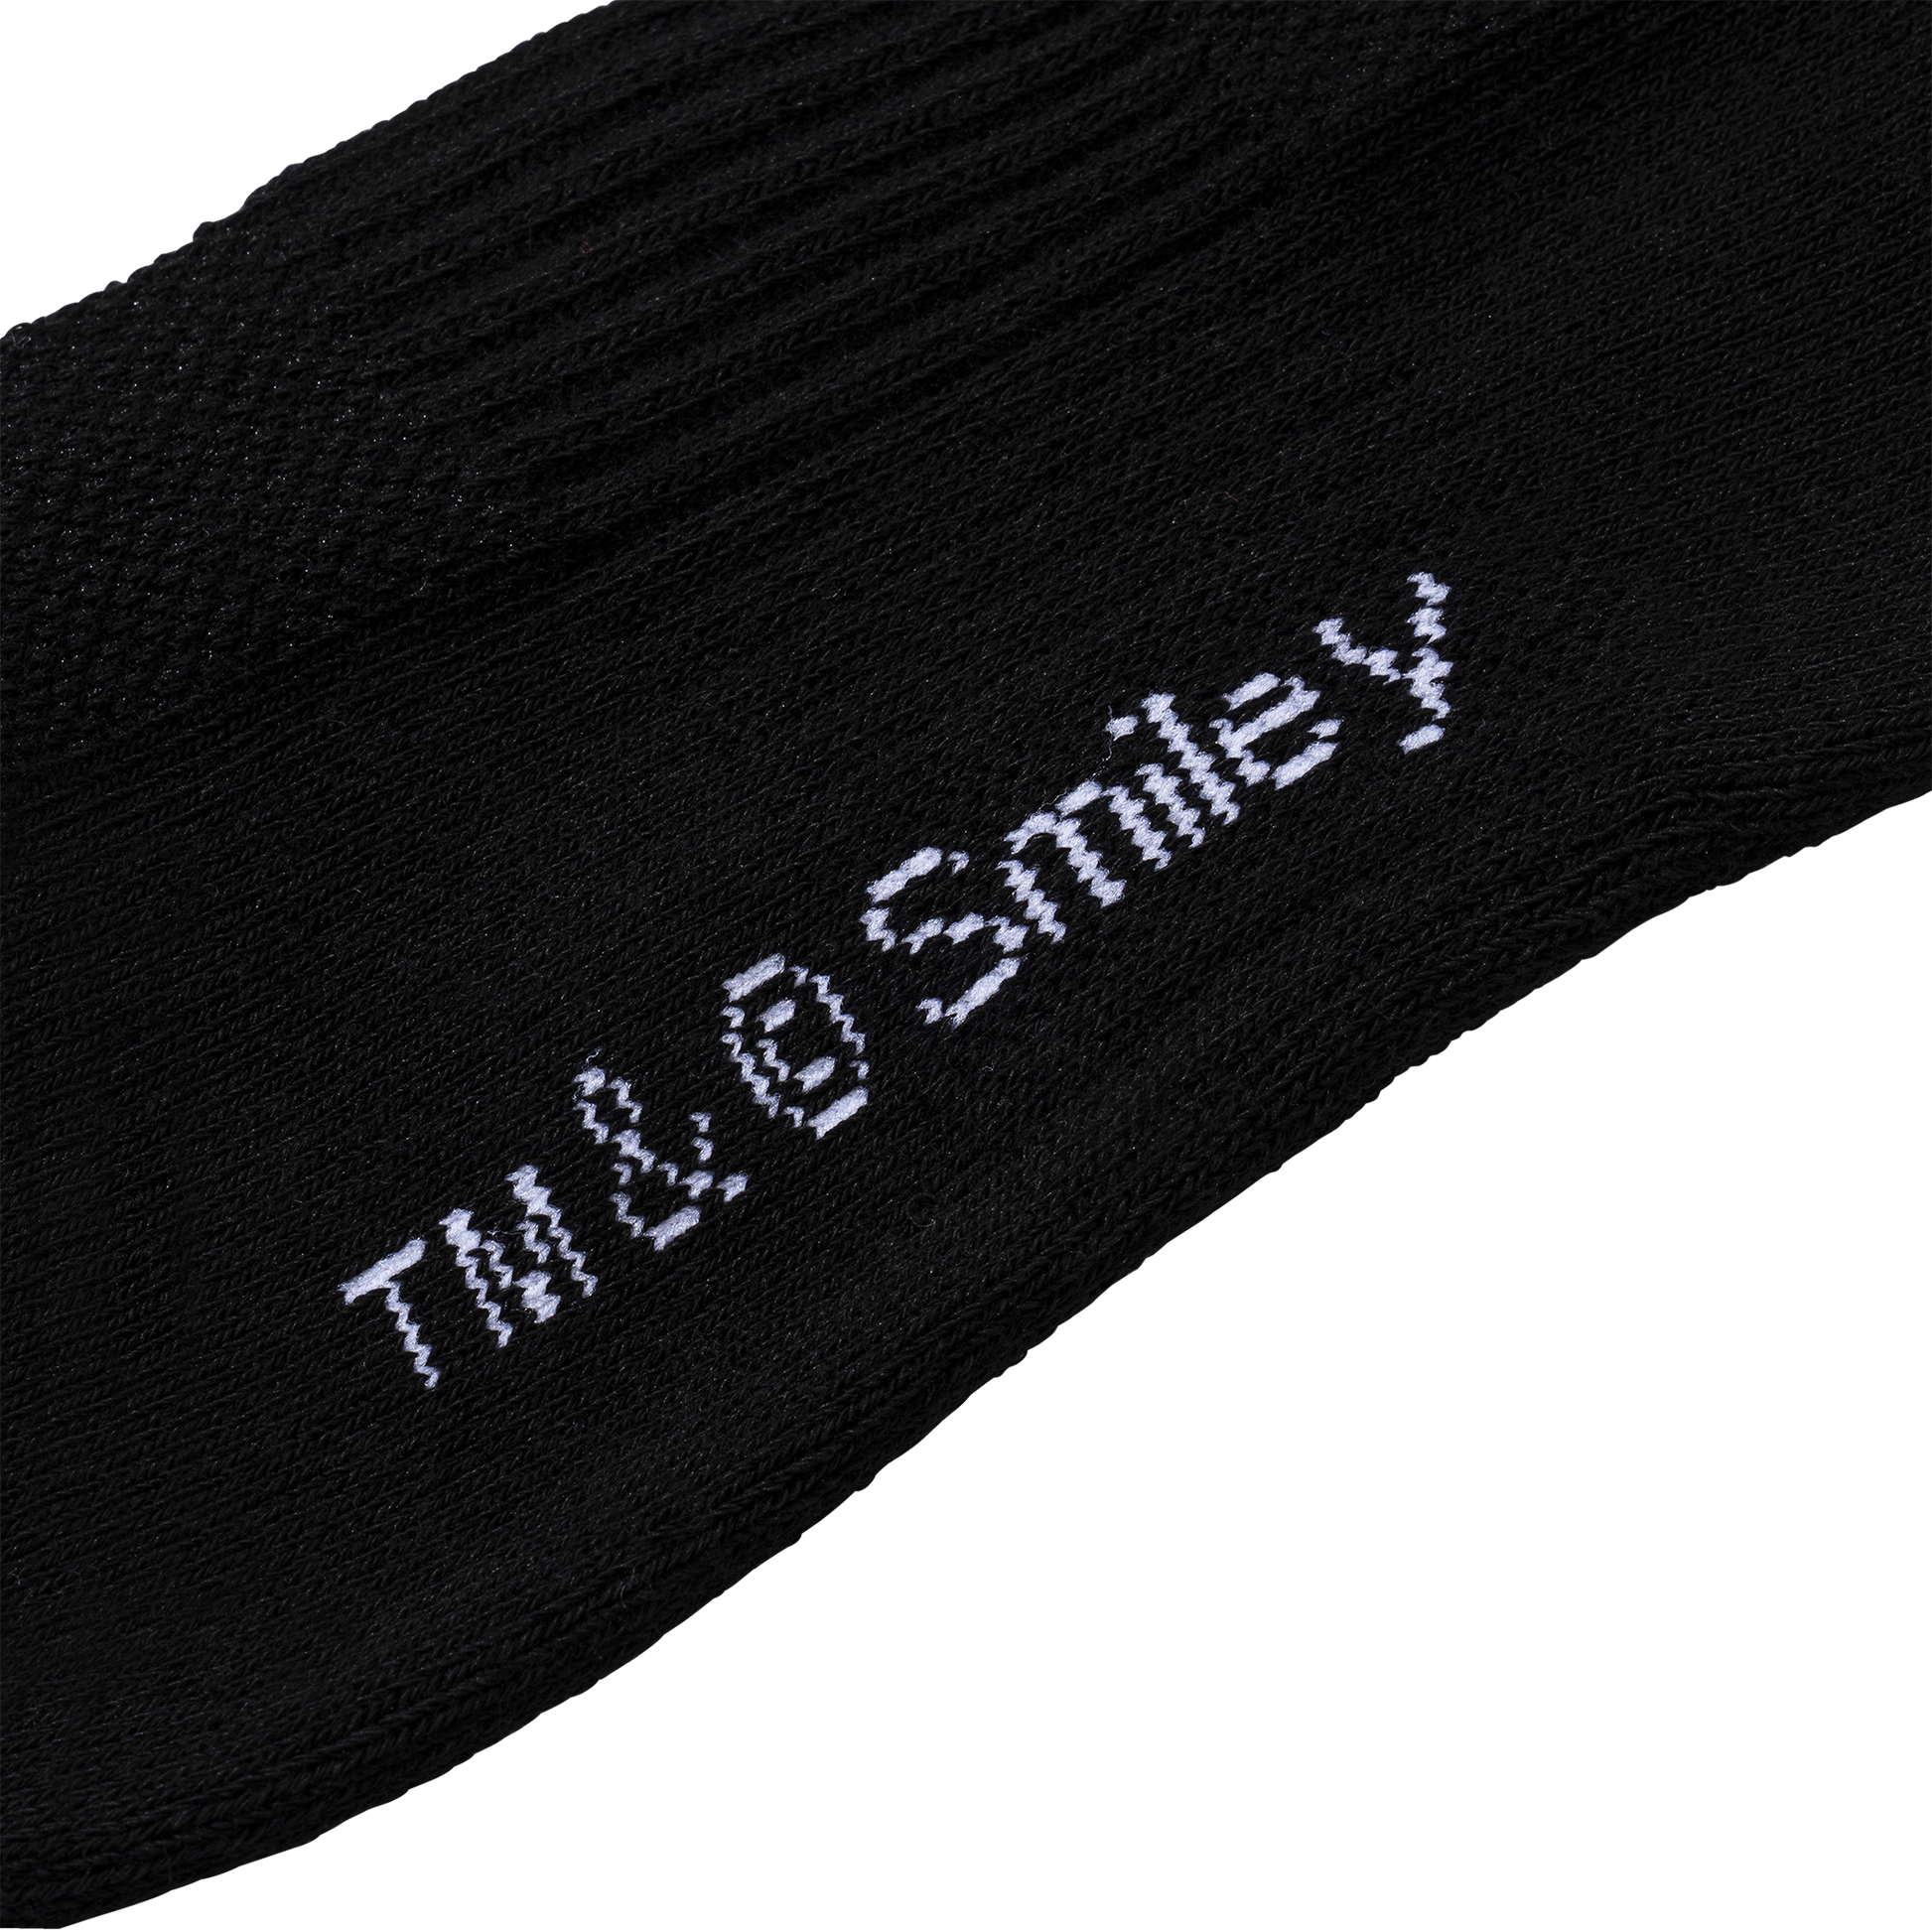 MARKET clothing brand SMILEY INNER PEACE SOCKS. Find more graphic tees, socks, hats and small goods at MarketStudios.com. Formally Chinatown Market.